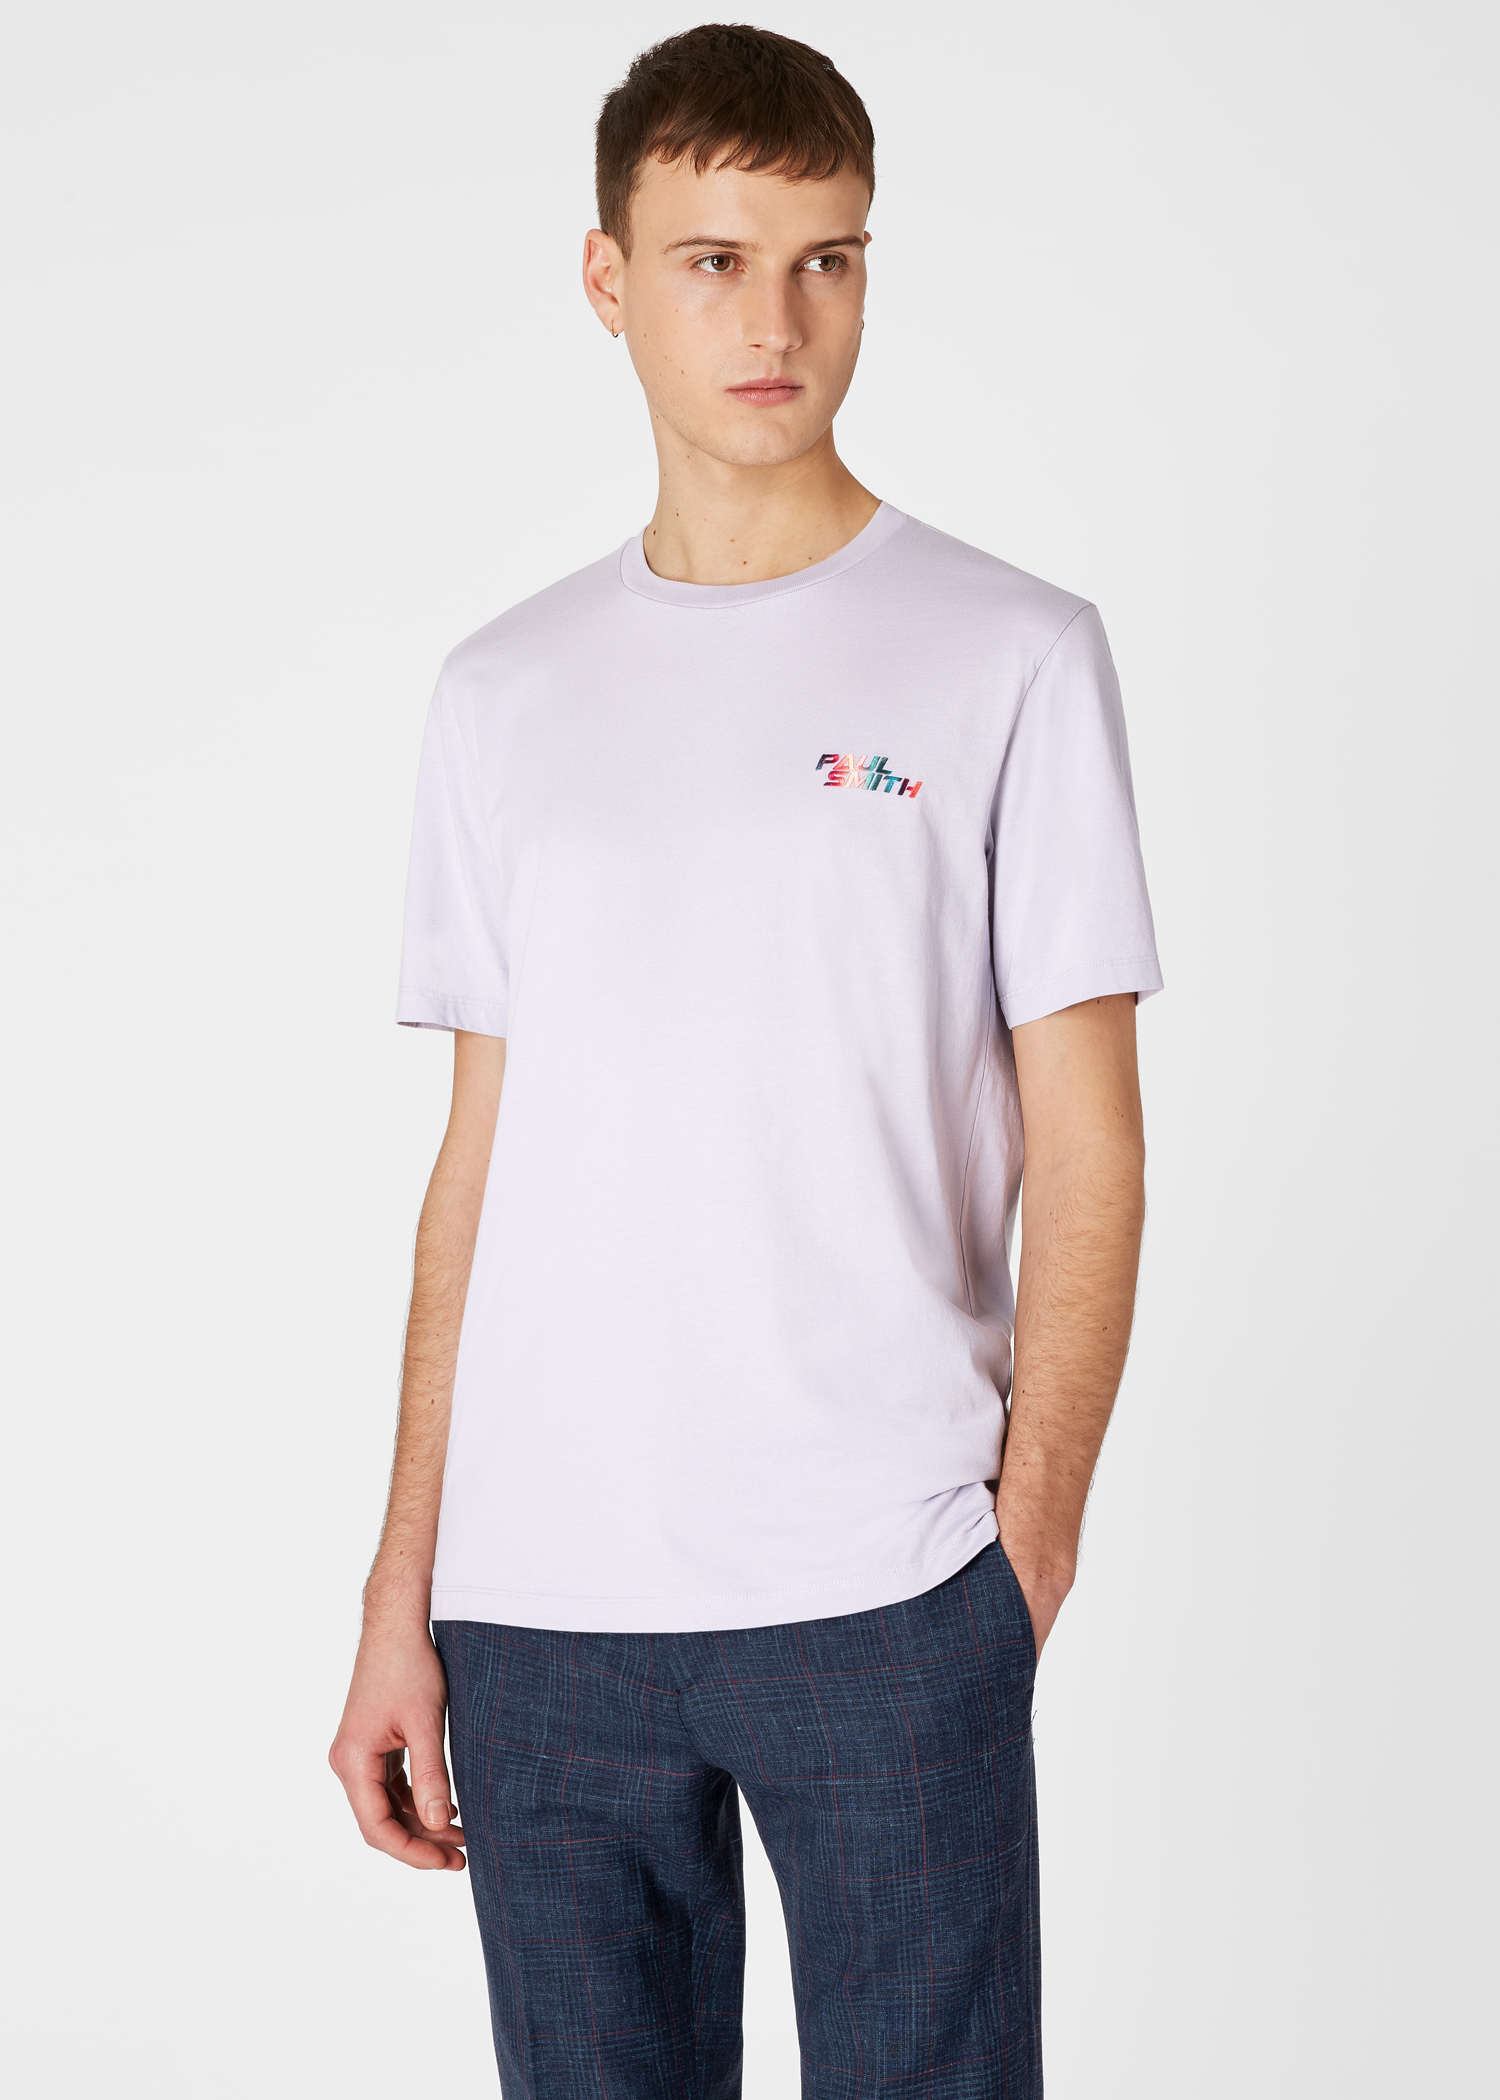 Model front close up - Men's Slim-Fit Lilac T-Shirt With 'Paul Smith' Embroidery Paul Smith